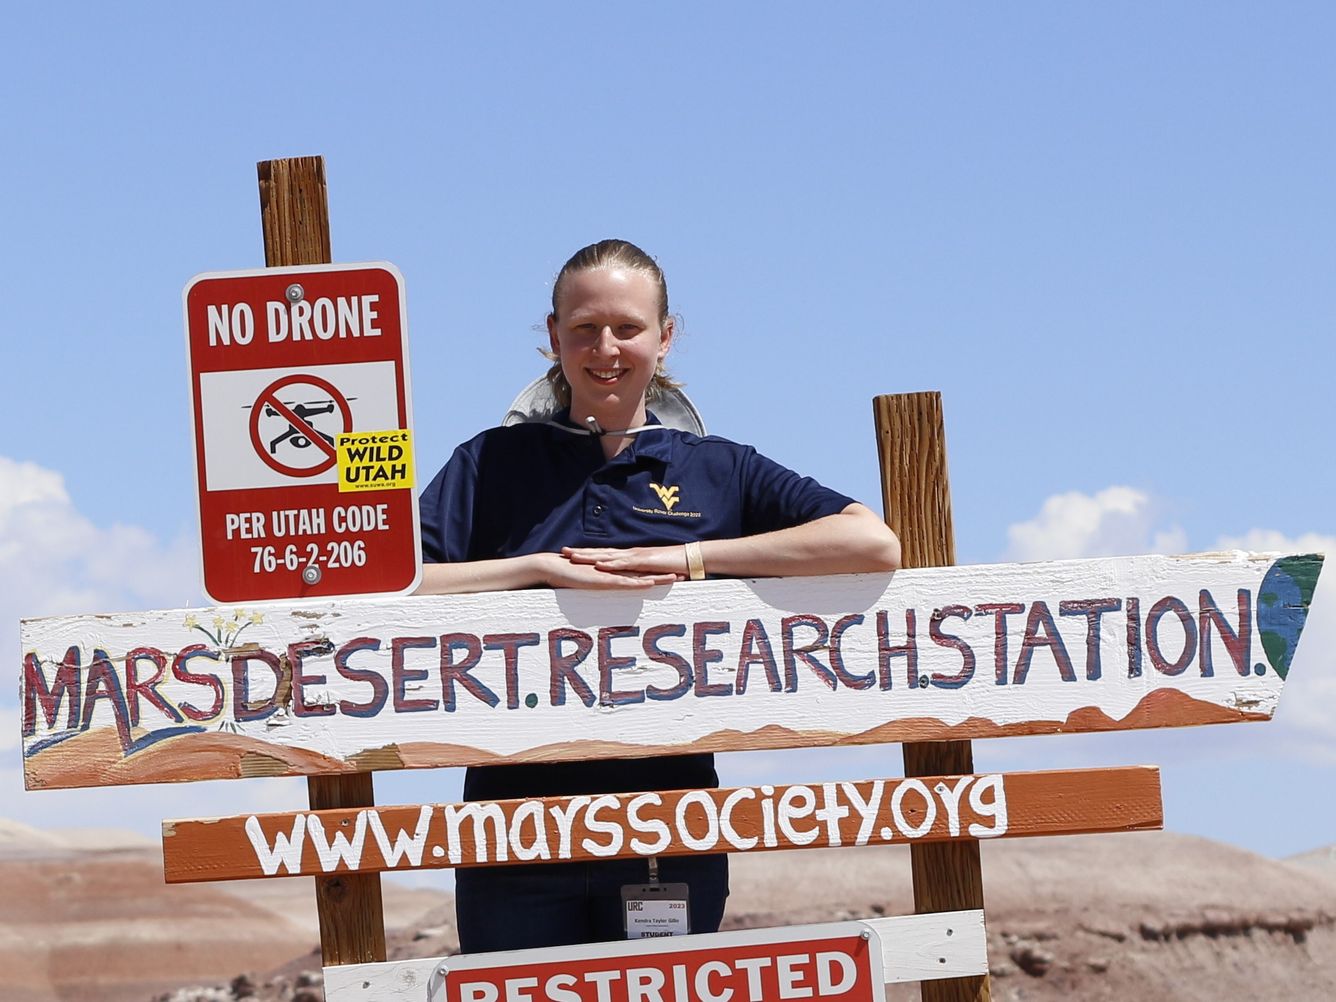 Person standing behind Mars Desert Research Station sign